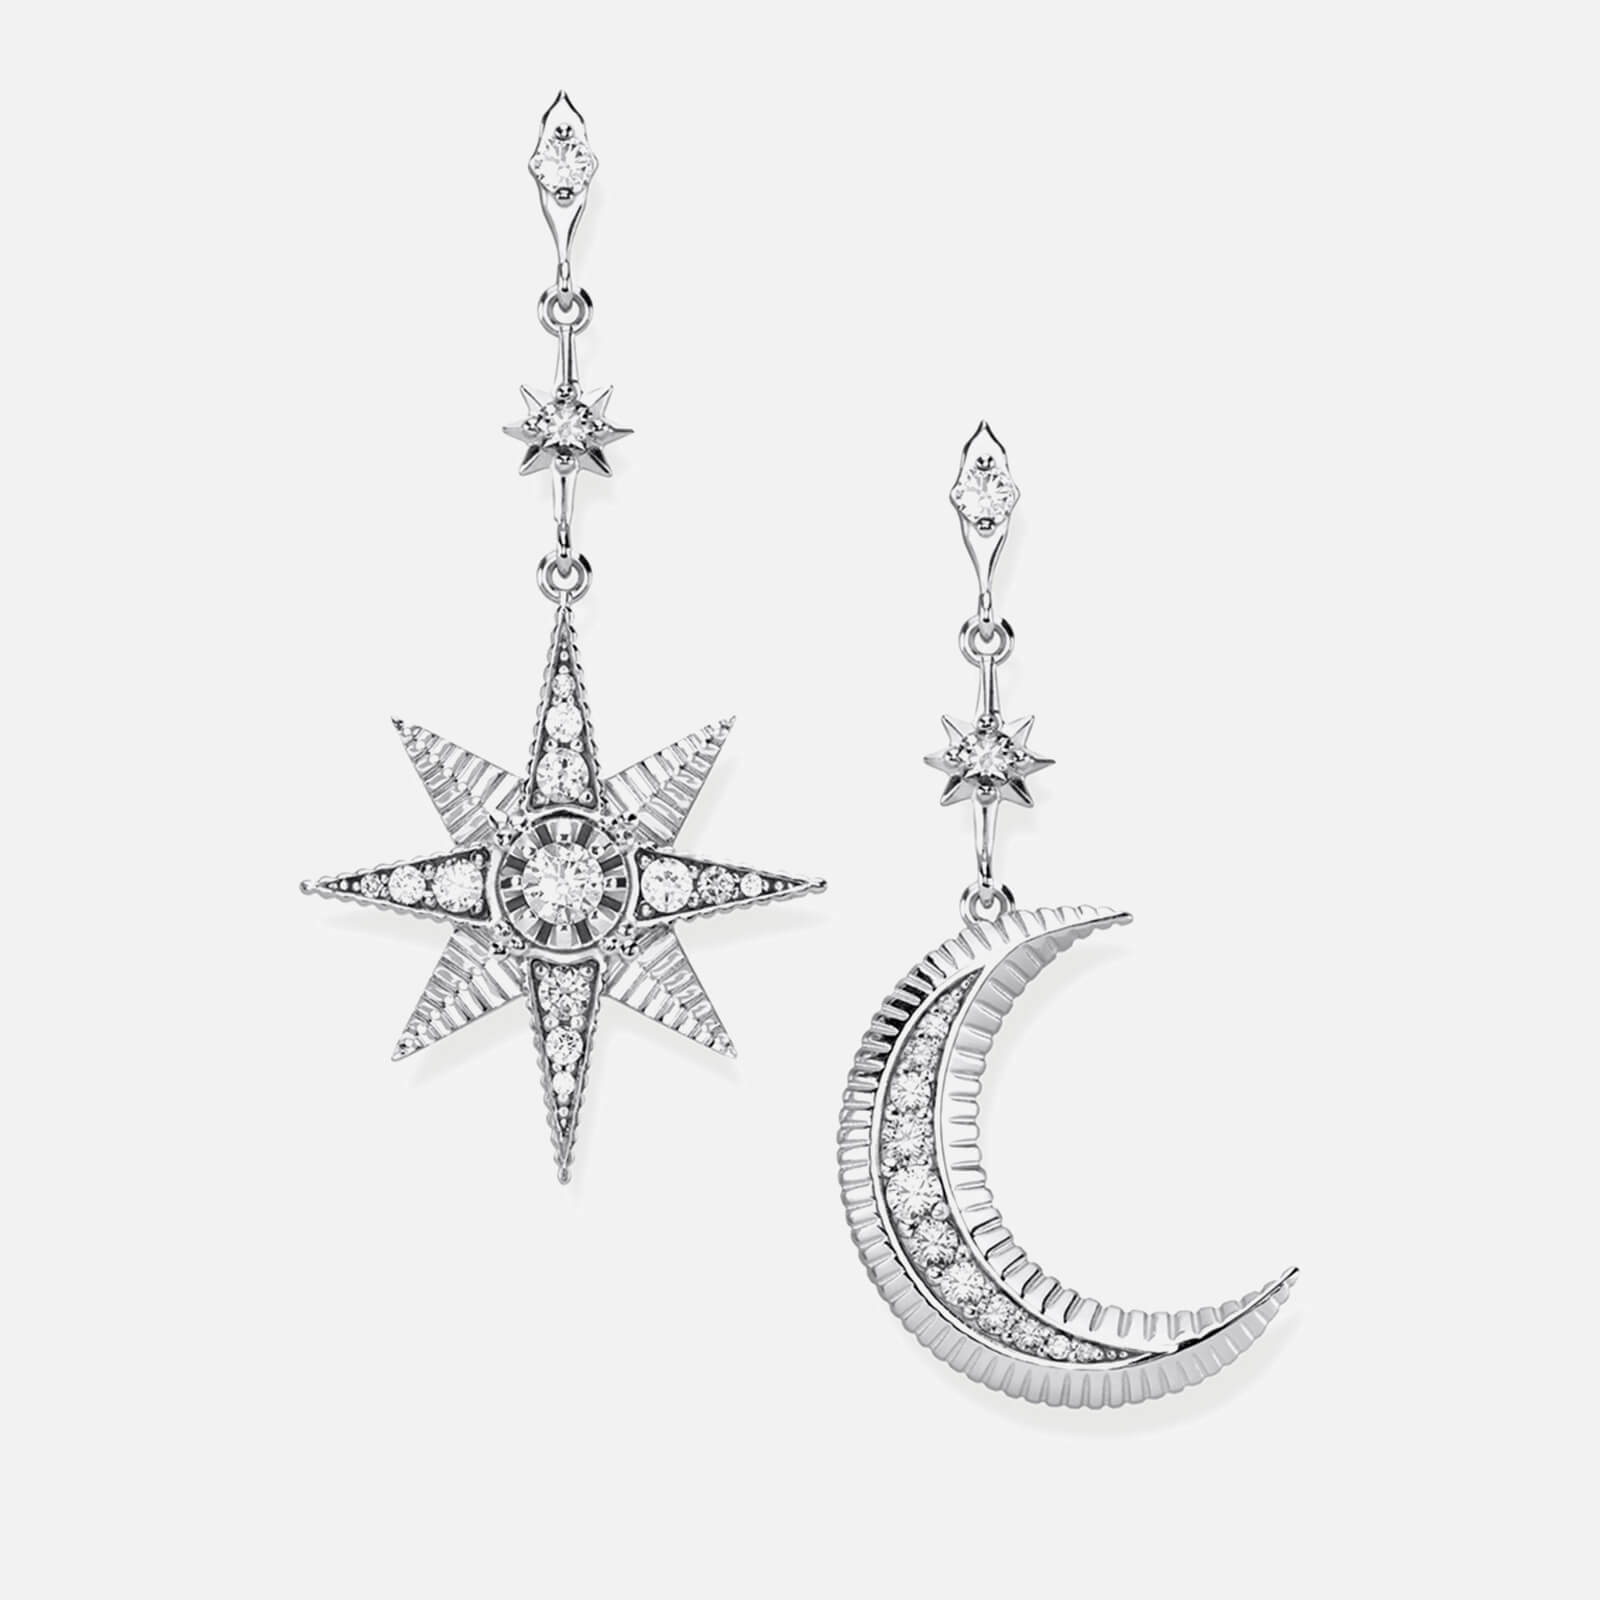 Photos - Pendant / Choker Necklace Thomas Sabo Star and Moon Sterling Silver Earrings H2026-643-14